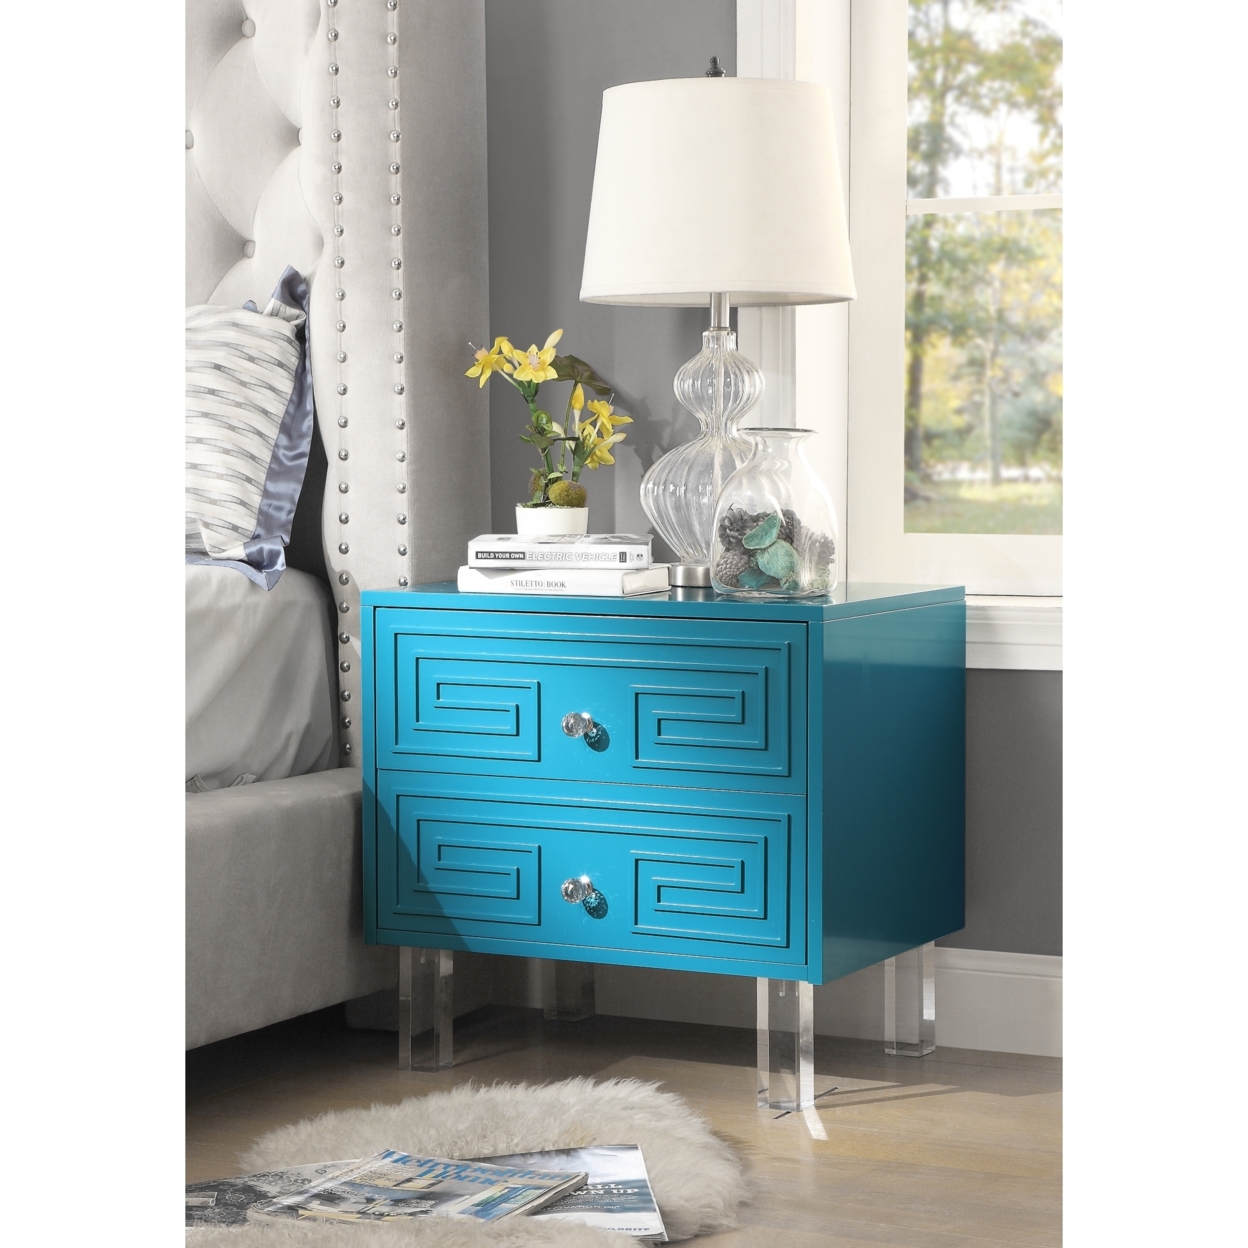 Lottie Glossy Nightstand-Lacquer Finish-Side Table-Acrylic Lucite Legs-Modern & Functional By Inspired Home - Light Grey